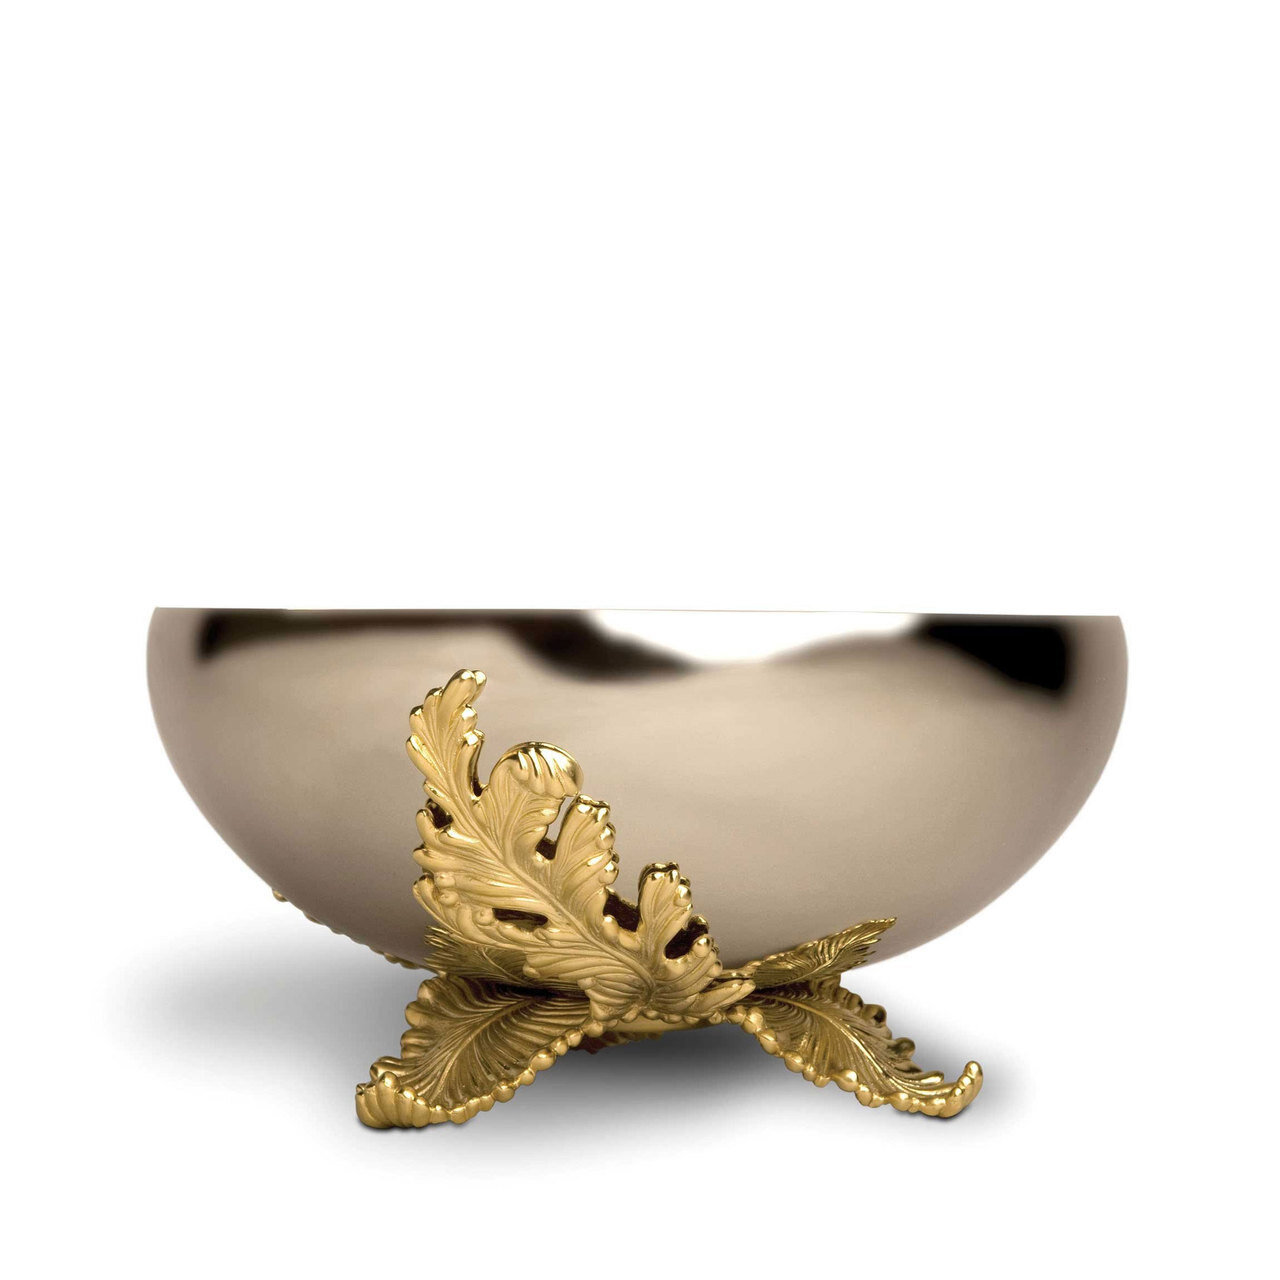 L'Objet Lamina Large Bowl Handcrafted Stainless Steel with 24k Gold-Plated leaf accents.